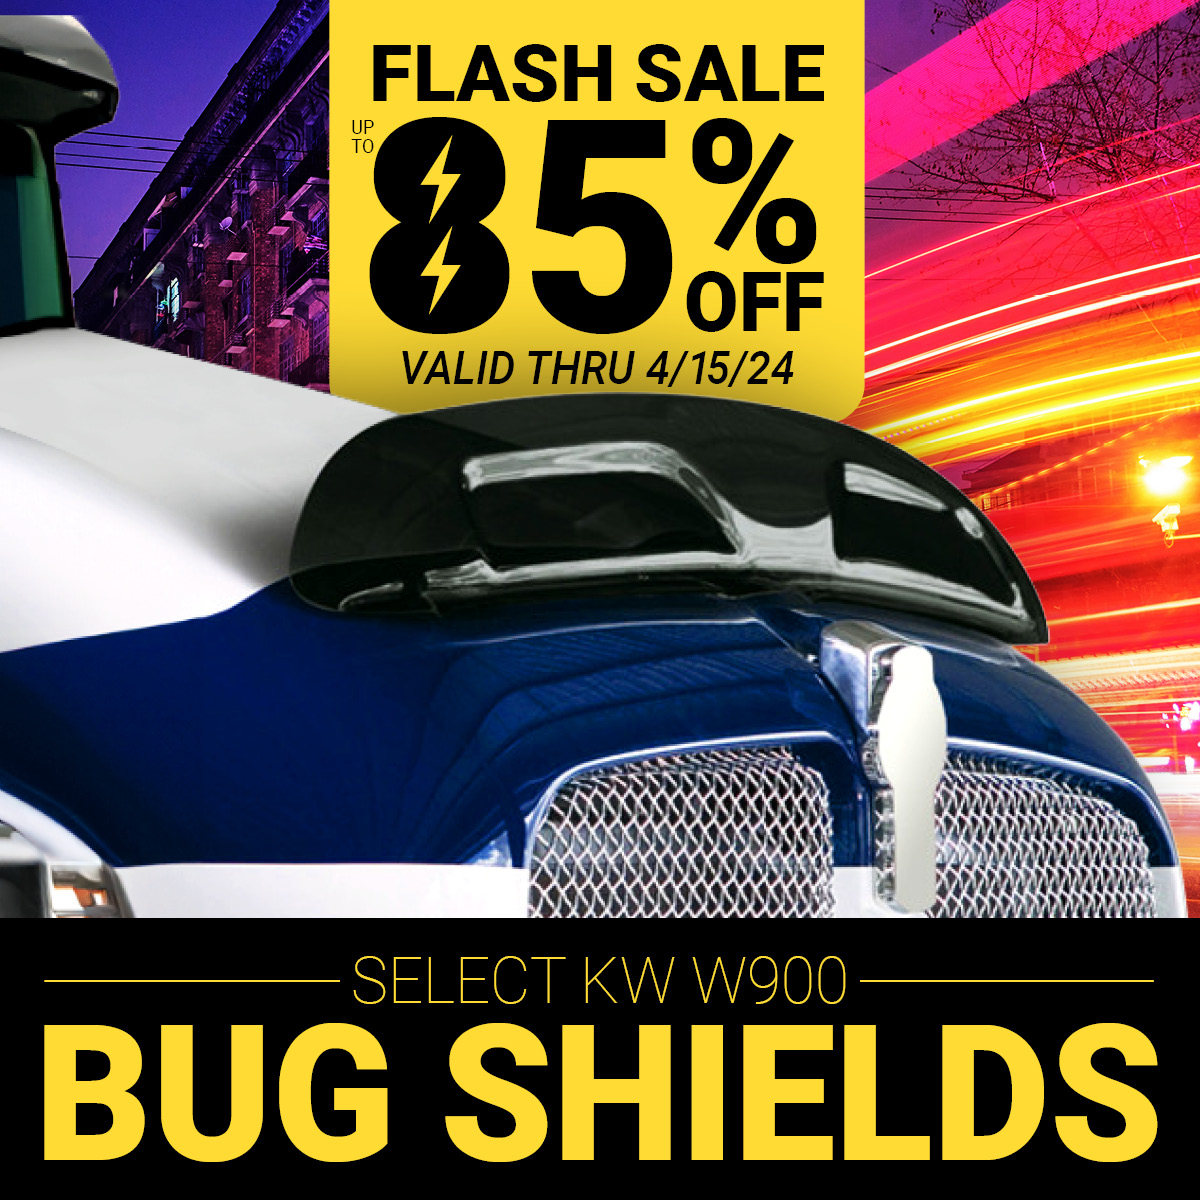 Just a few more hours to save up to 85% on select Kenworth W900 EGR Bug Shields! 🪰
4statetrucks.com/search/?search…
Ends 4/15 11:59 p.m. cst. 

#4StateTrucks #ChromeShopMafia #chromeshop #customtrucks #trucking #bigrig #truckers #diesel #bugshield